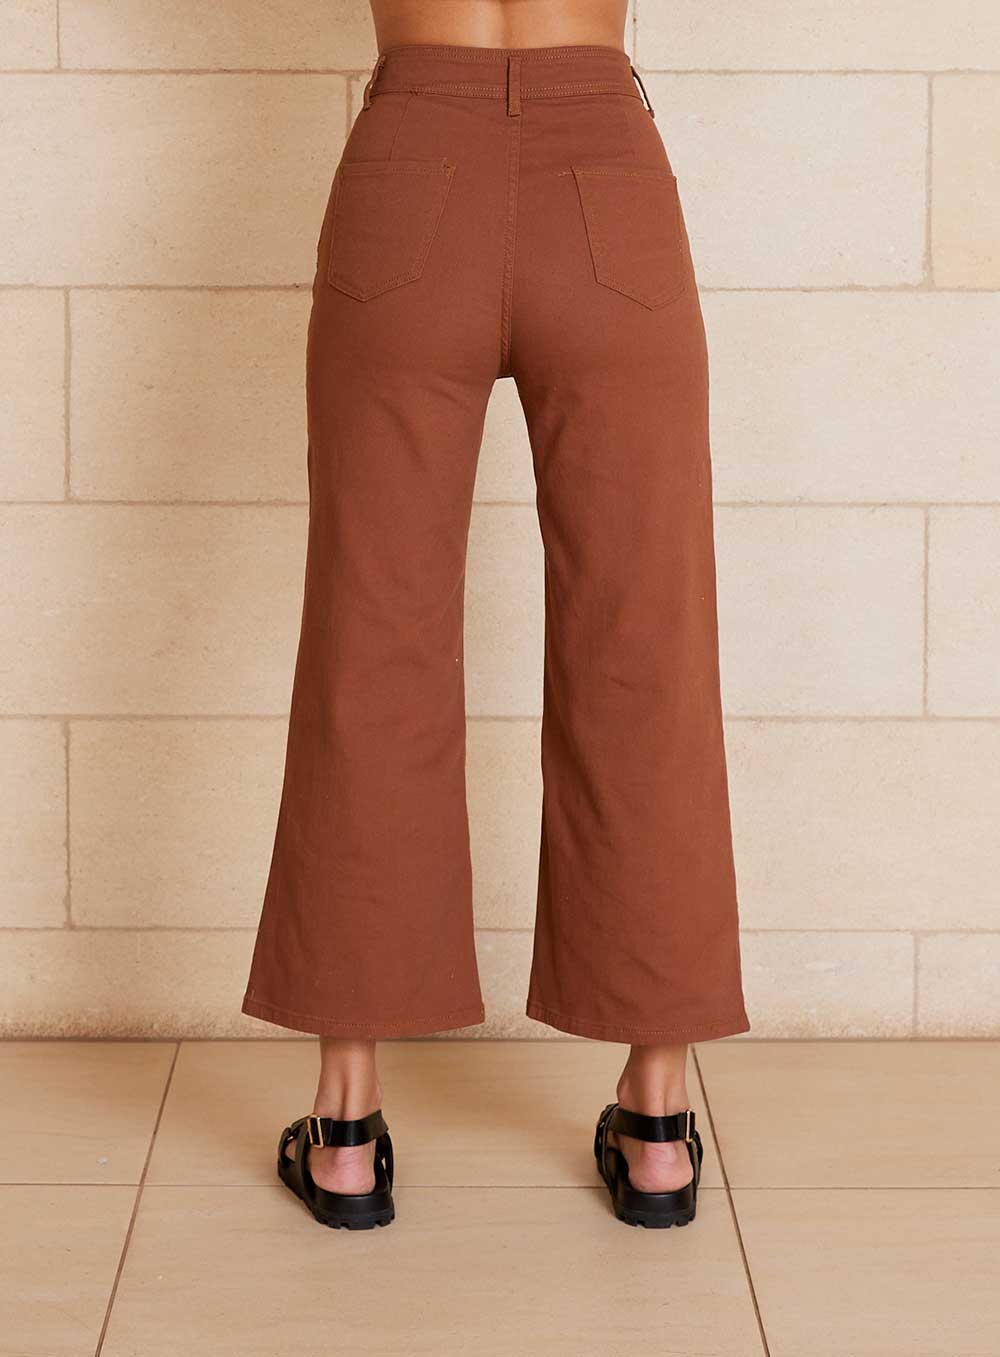 Stassy Wide Leg Pant featuresfunctional pockets back and front, fitted through the hips with subtle darts through the front, cropped in length, flared from the knee down, belt loops and press dtud button..